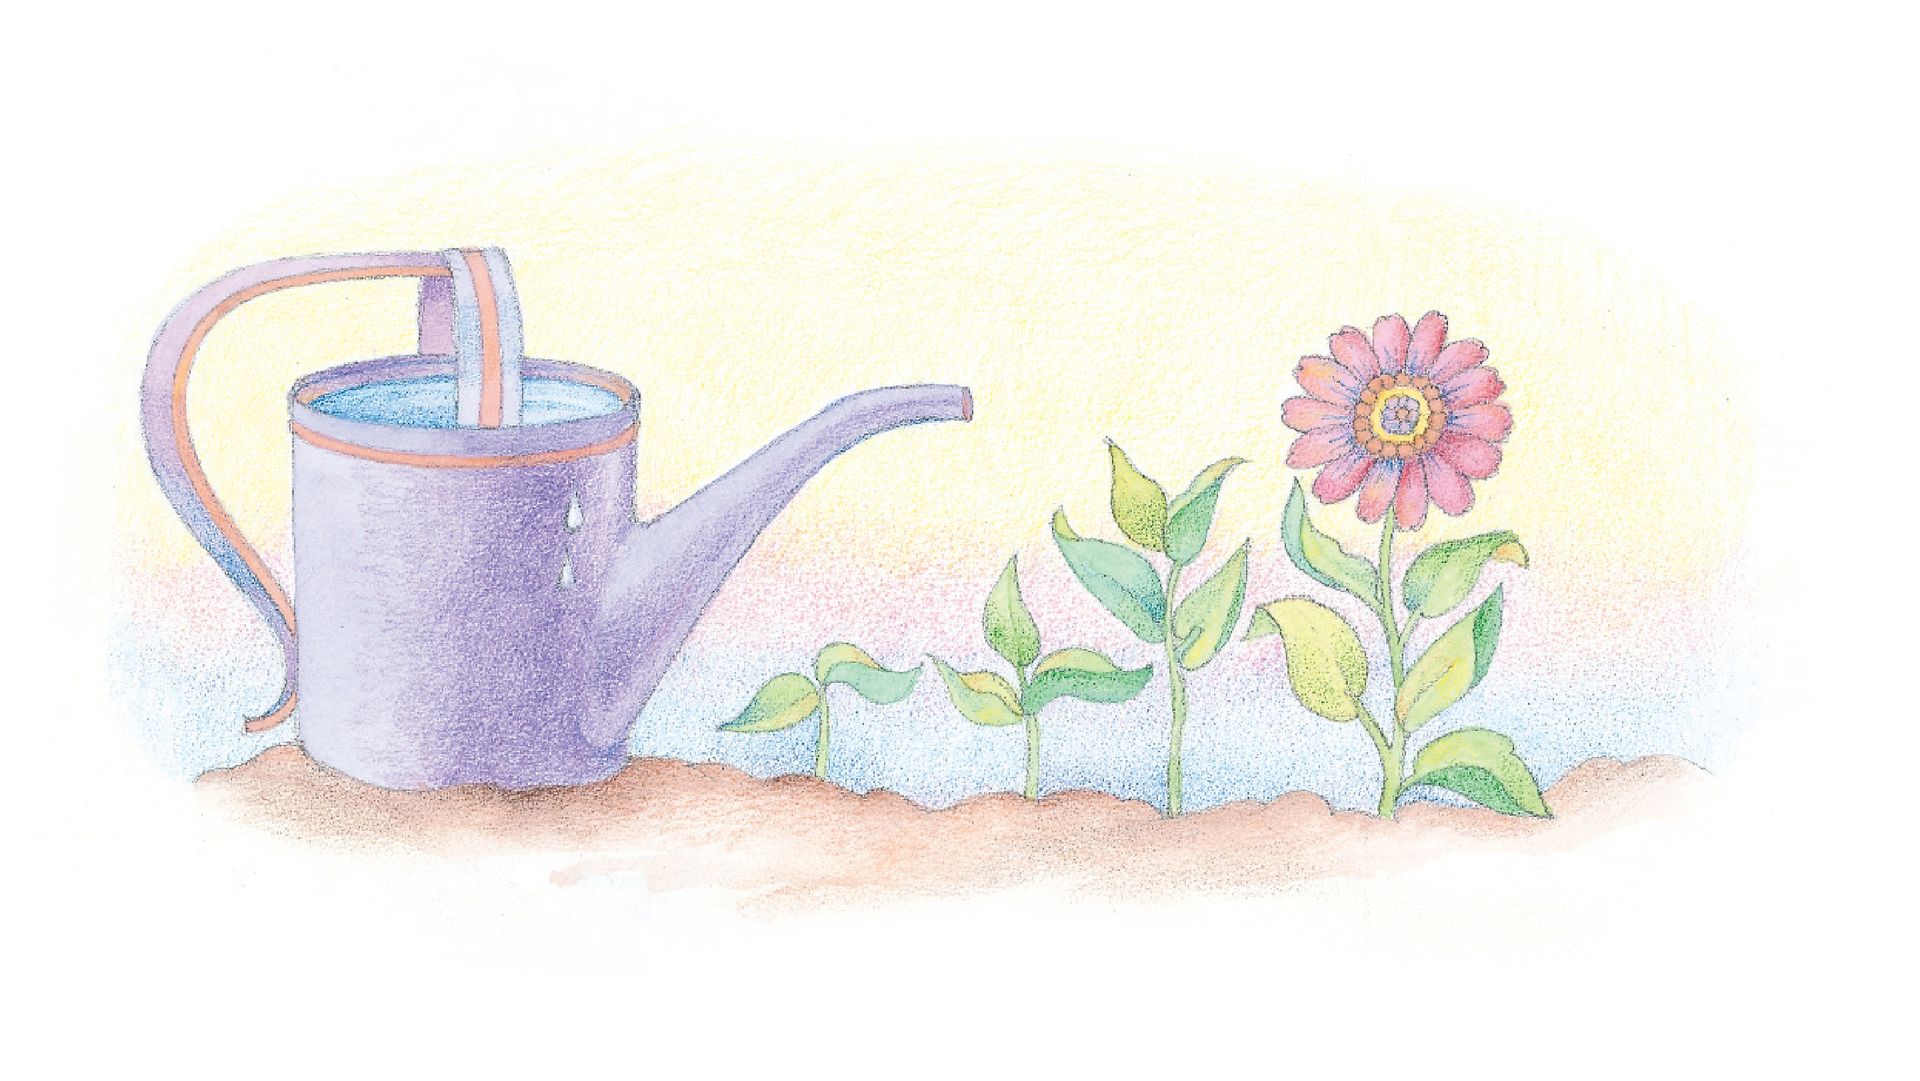 A watering can full of water next to a row of sprouts. From the Children’s Songbook, page 96, “Faith”; watercolor illustration by Phyllis Luch.